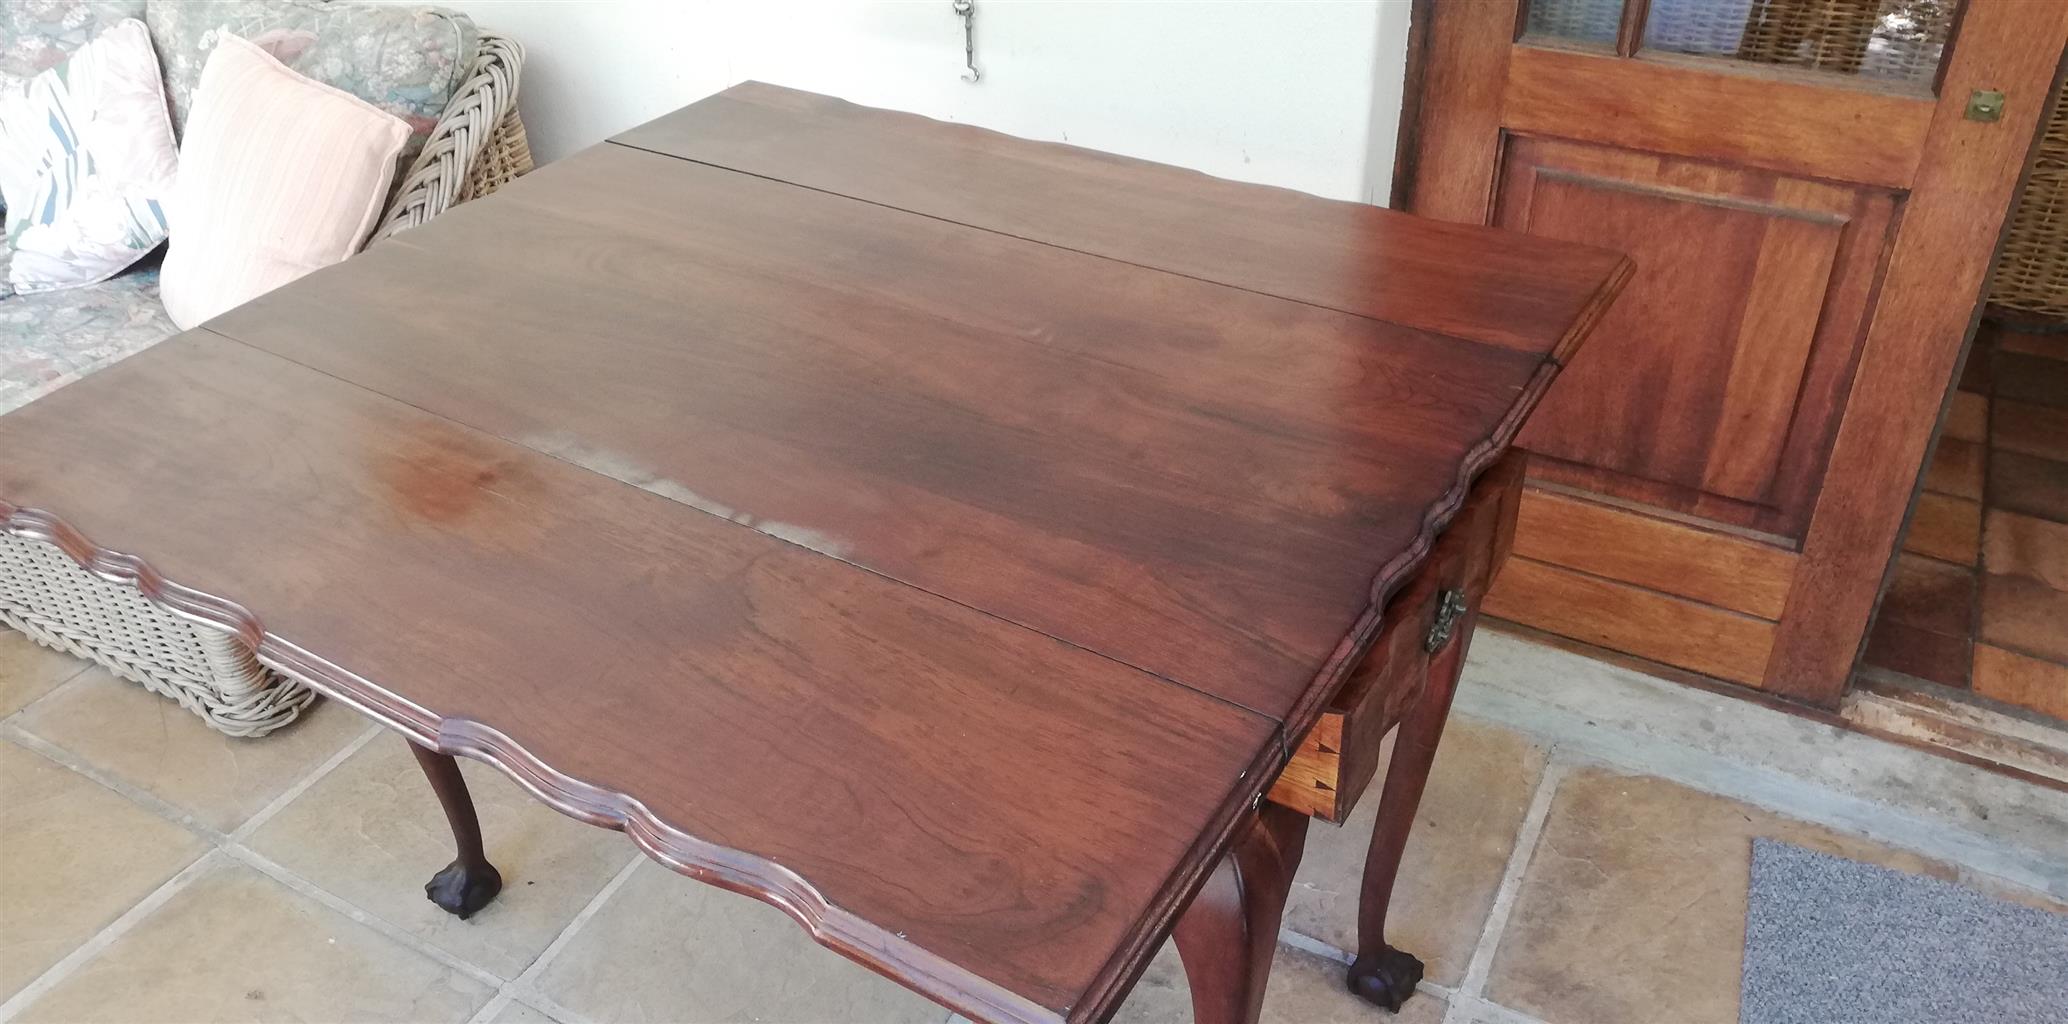 Vintage Stinkwood Ball and Claw drop leaf Occasional Table